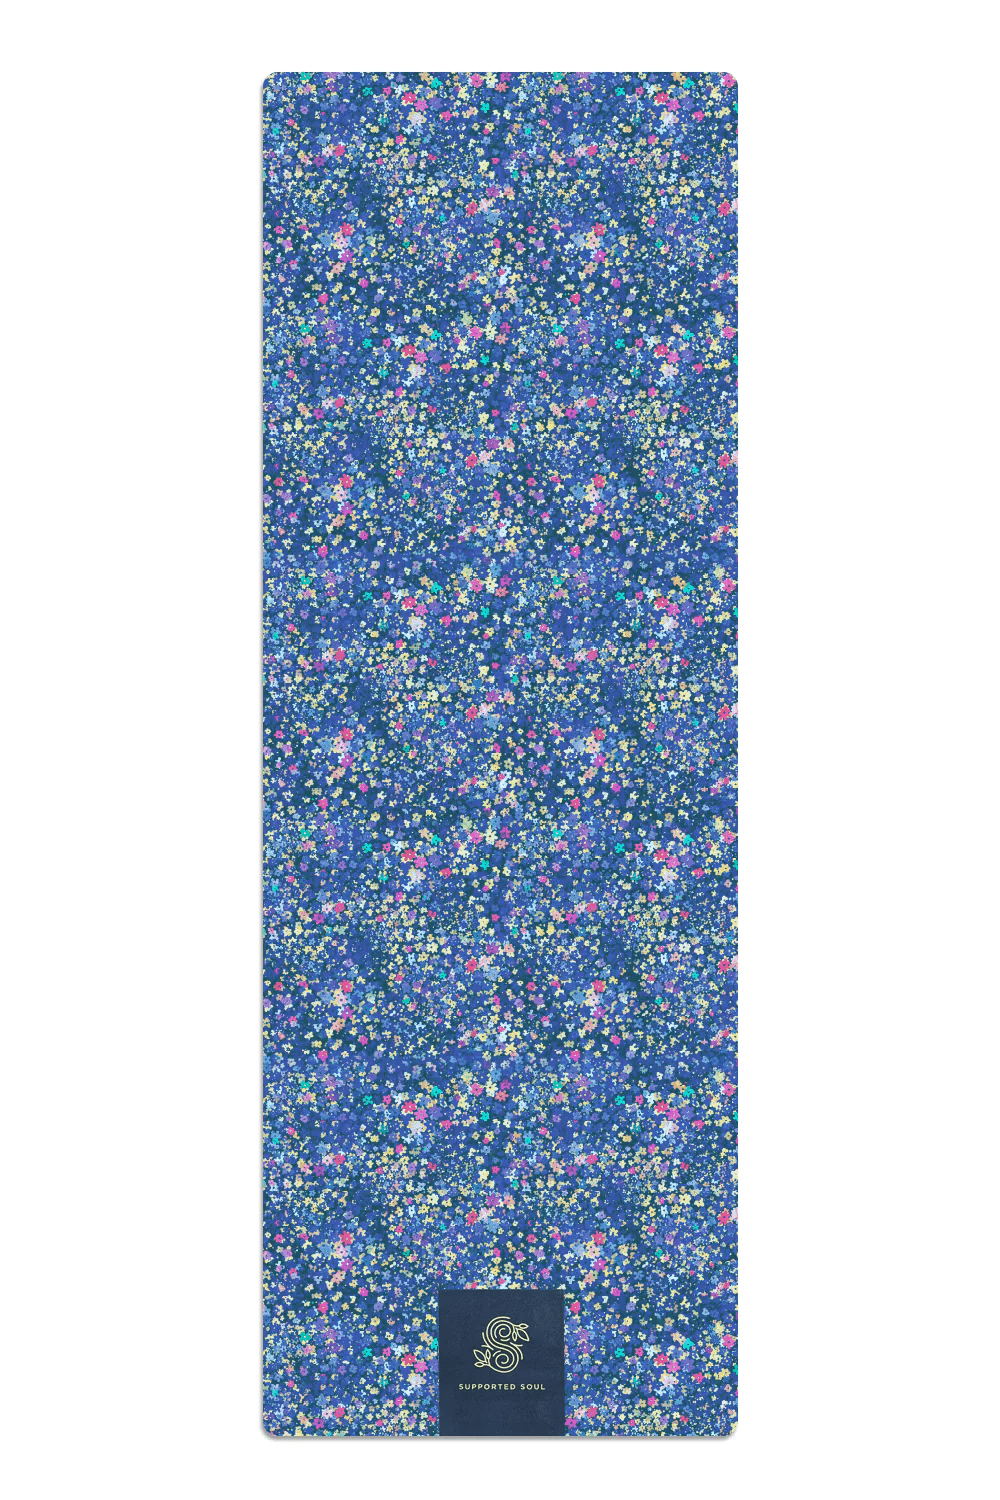 In Bloom - All-In-One Yoga Mat